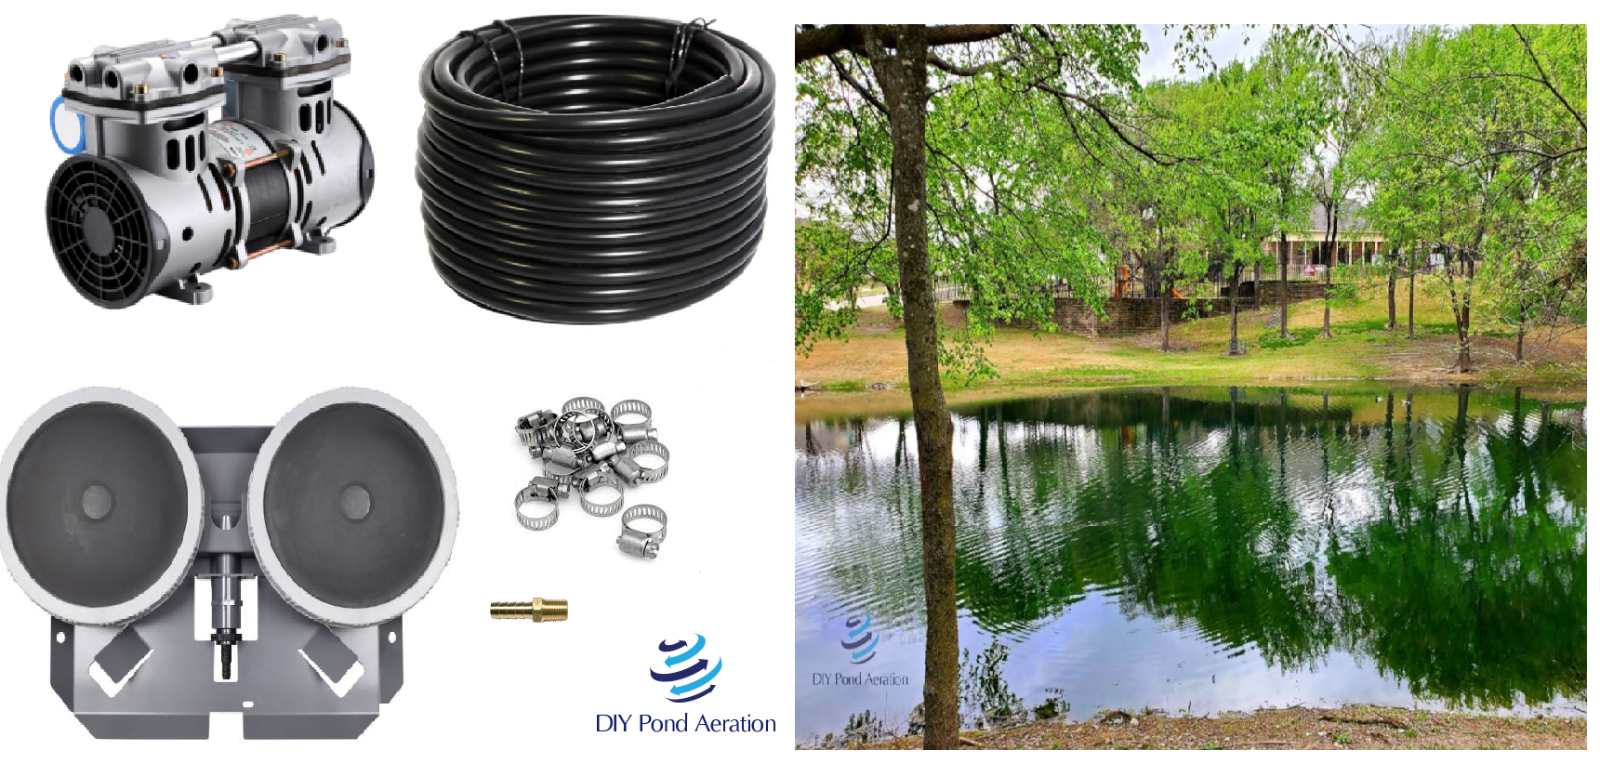 Large Pond Aerator System W/50' Wtd Hose-2 Weighted Diffusers New 1/2hp Pump